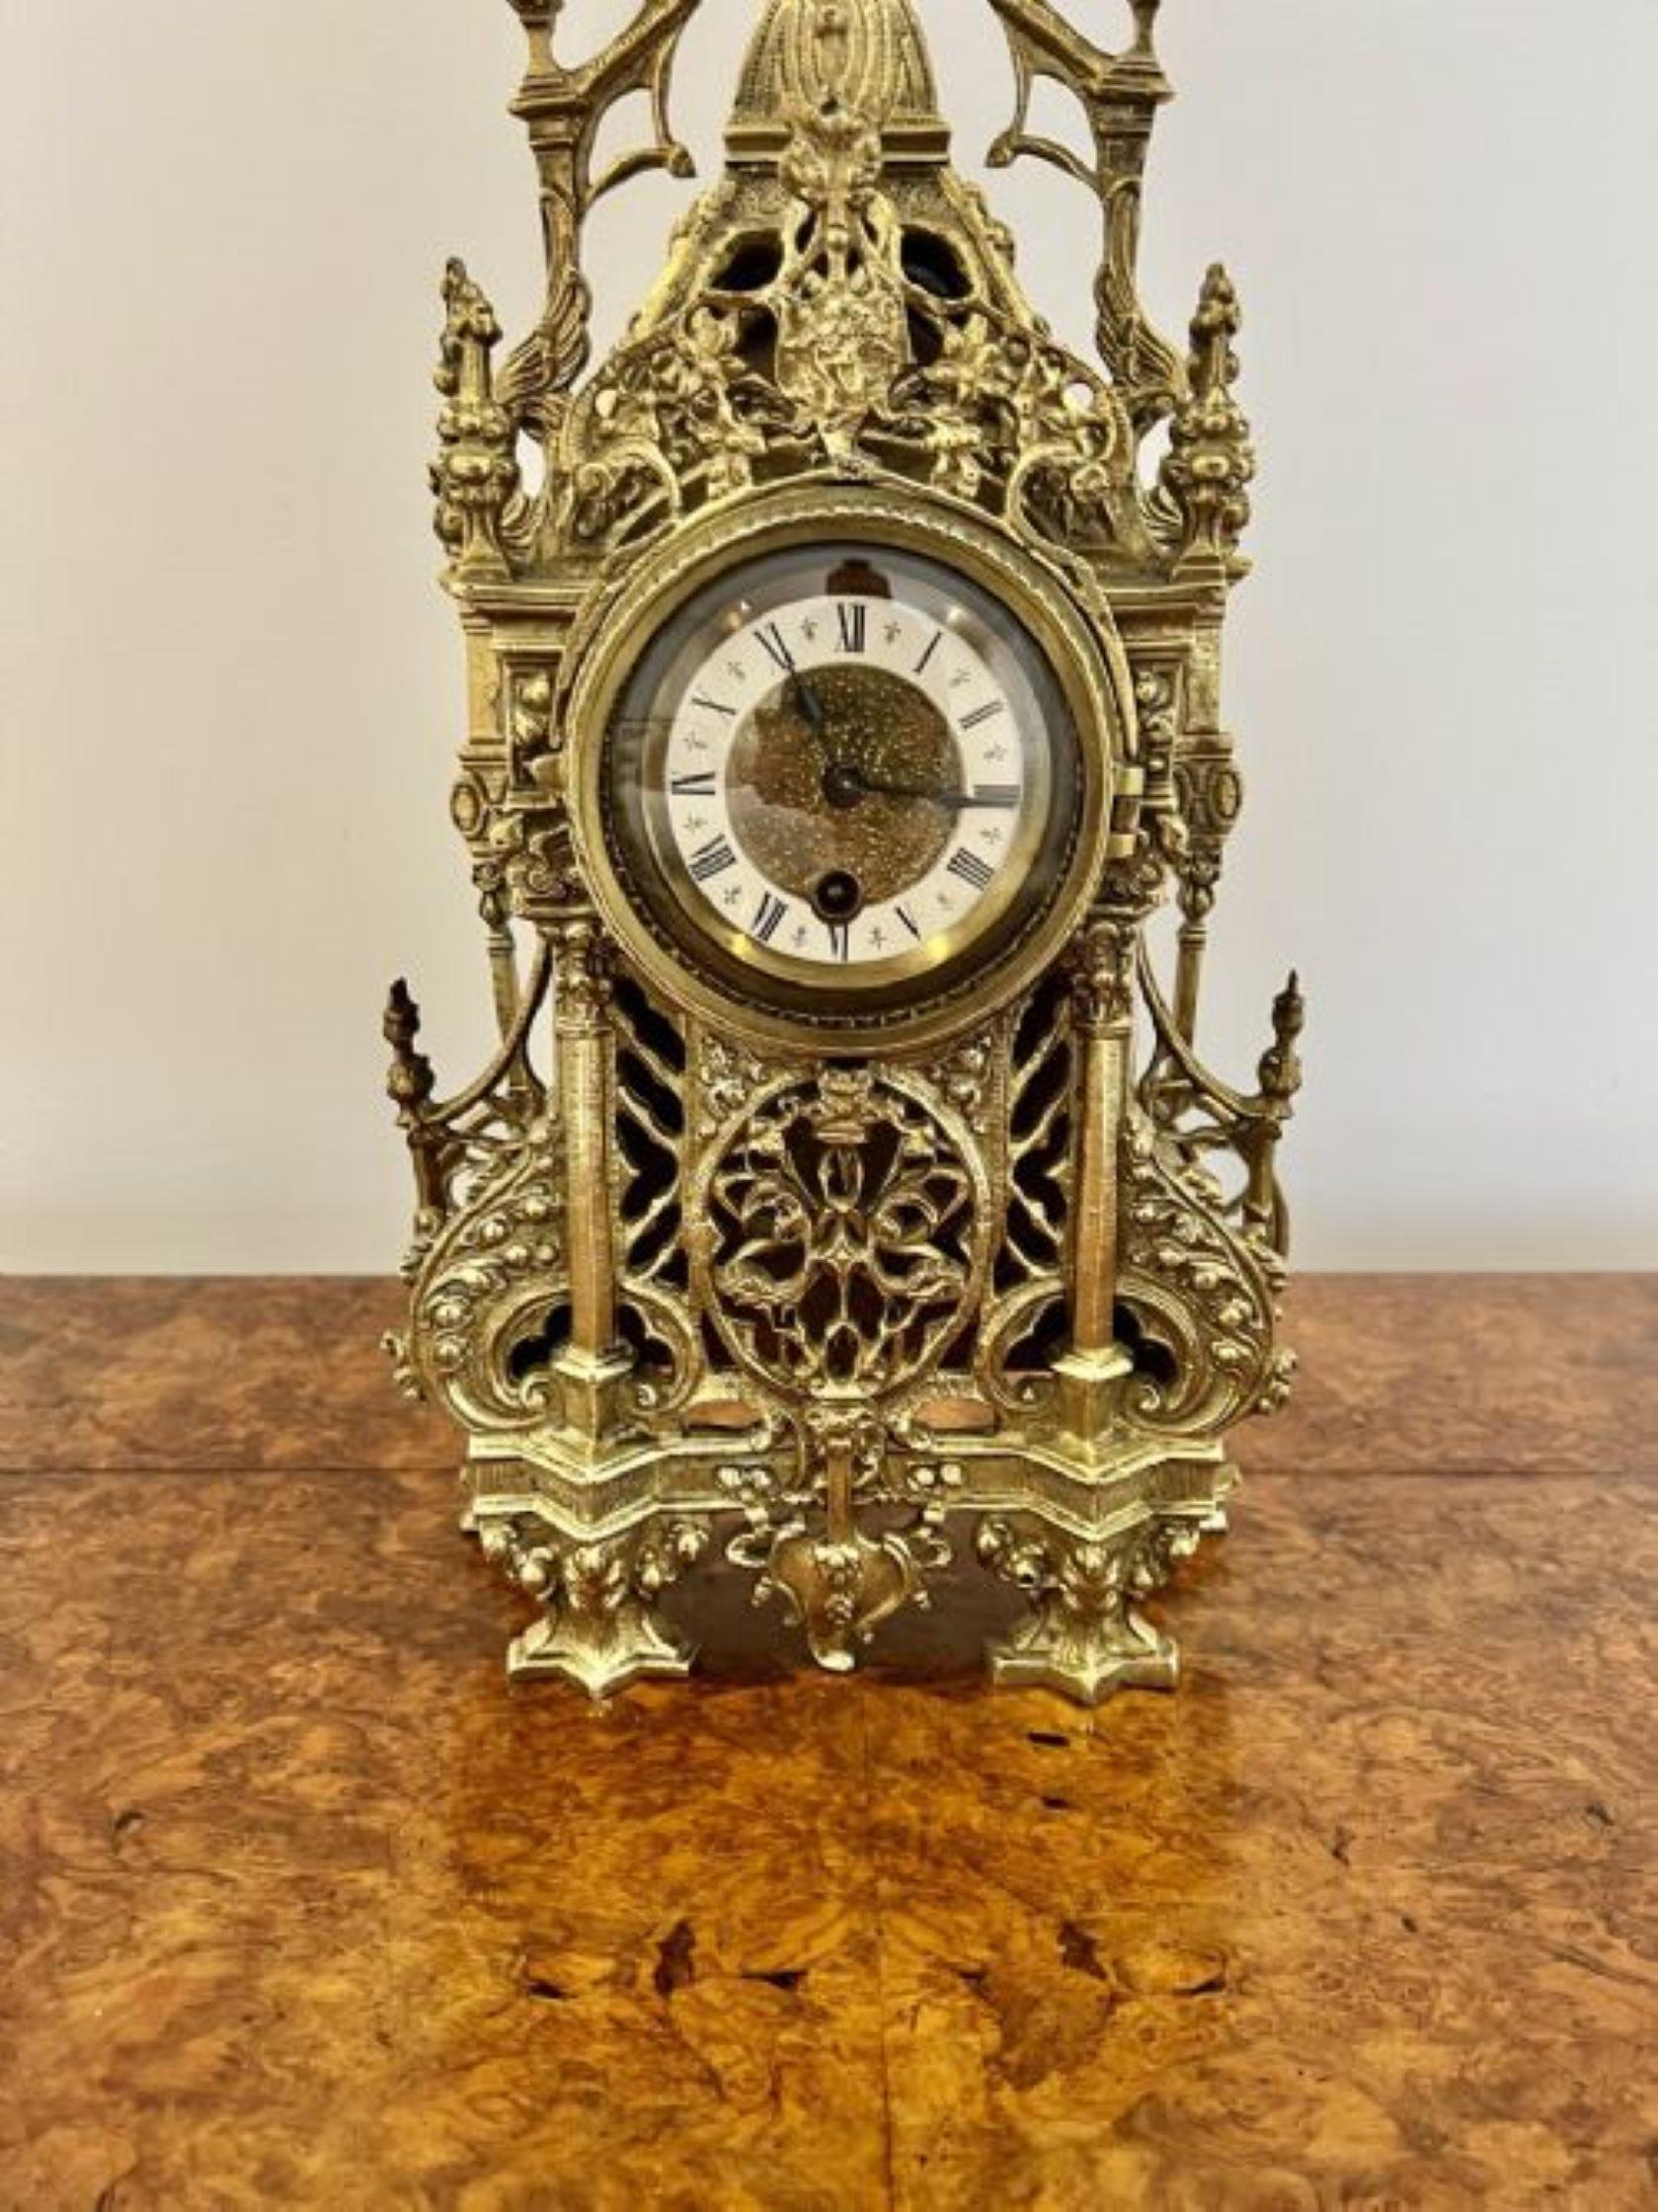 Wonderful antique Victorian quality ornate brass mantle clock having a quality ornate brass case, with a circular dial and Roman numerals, original hands an an eight day movement having the original key
Please note all of our clocks are serviced